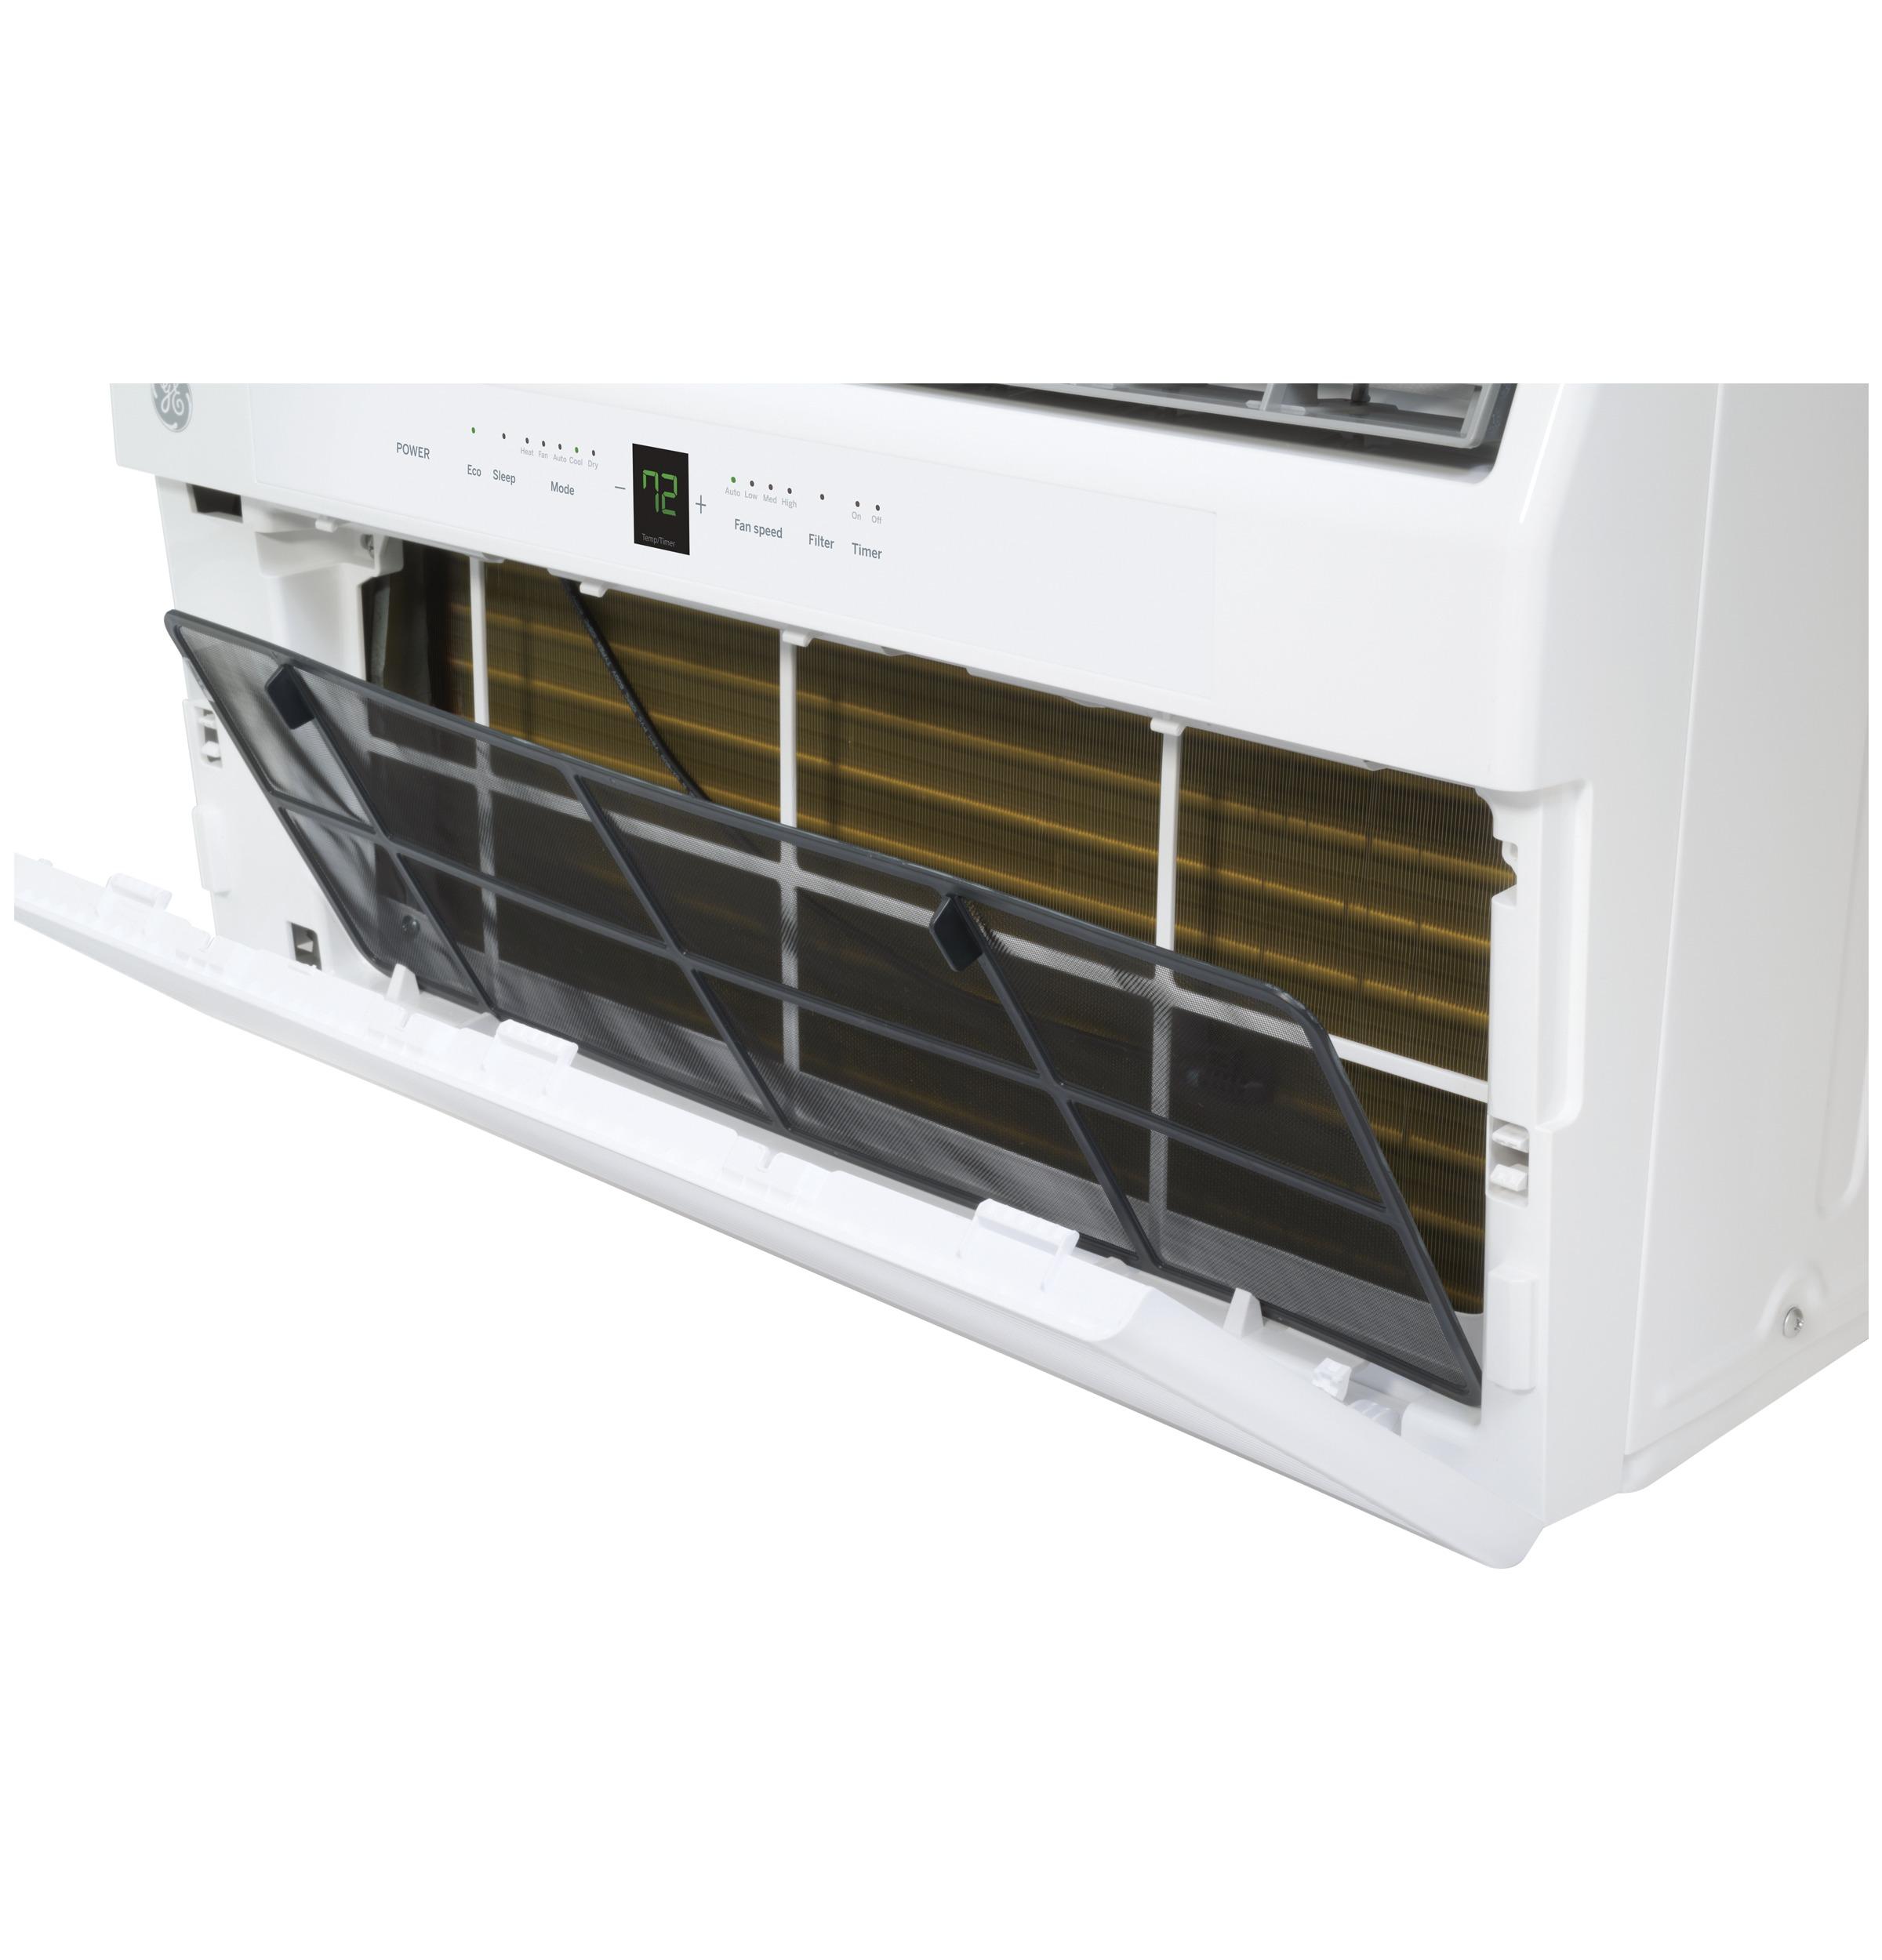 Ge Appliances AKEQ14DCJ Ge® Built In Air Conditioner